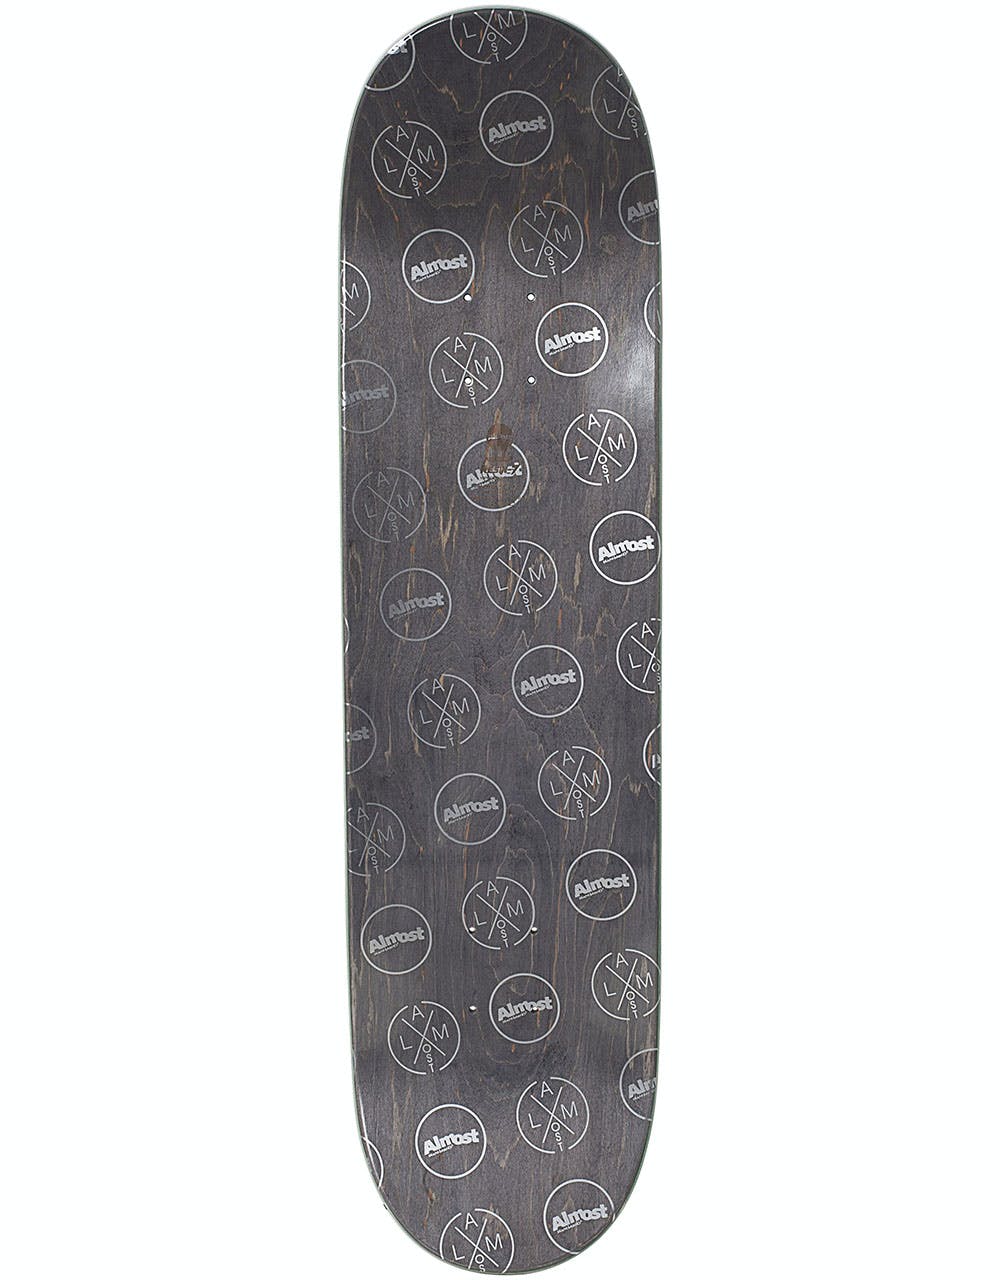 Almost Ultimate Cover Up R7 Skateboard Deck - 8.5"